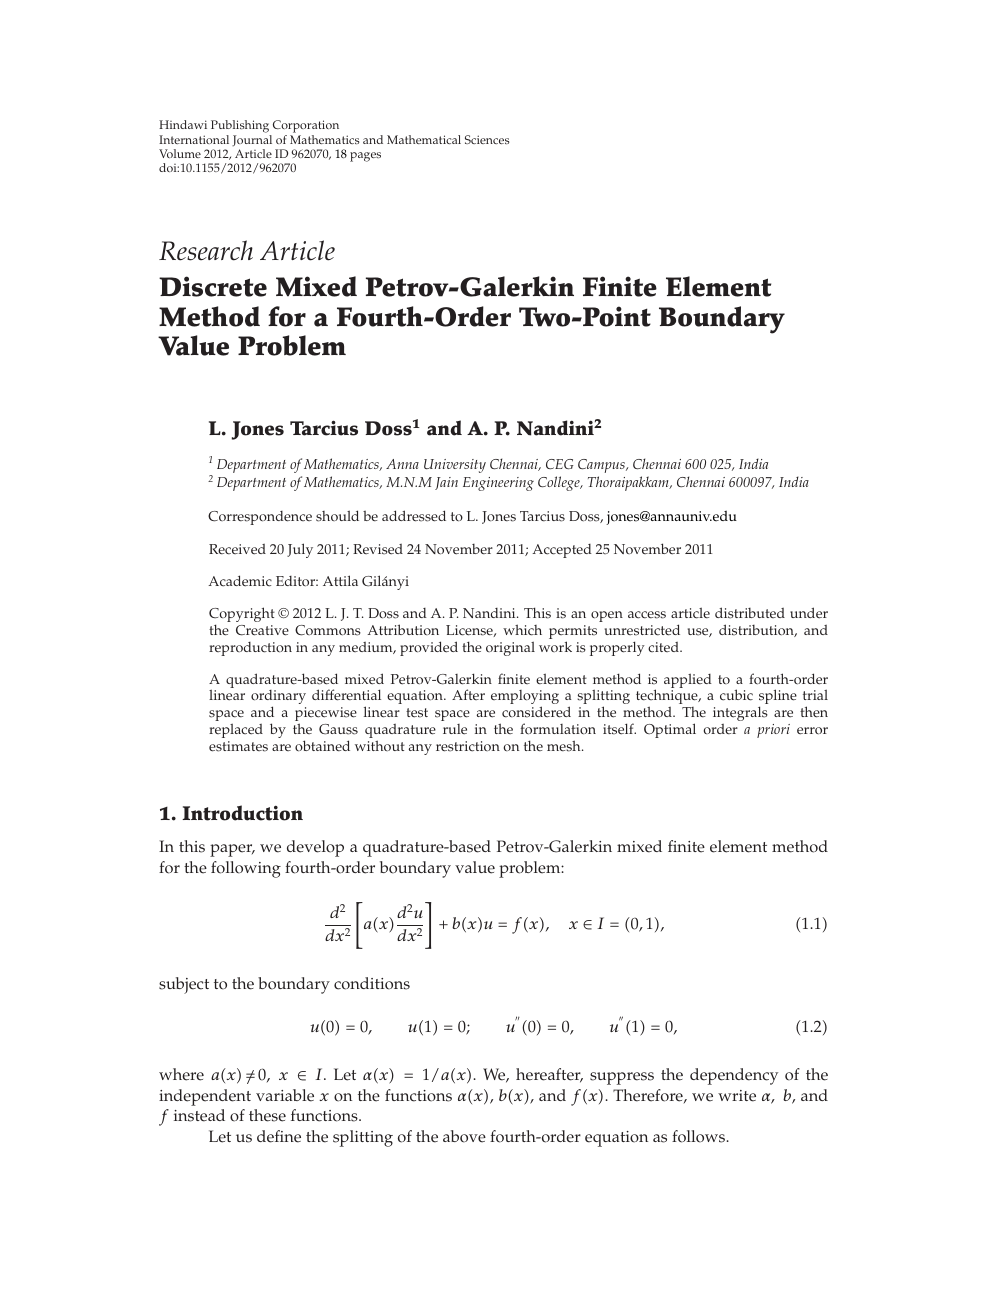 Discrete Mixed Petrov Galerkin Finite Element Method For A Fourth Order Two Point Boundary Value Problem Topic Of Research Paper In Mathematics Download Scholarly Article Pdf And Read For Free On Cyberleninka Open Science